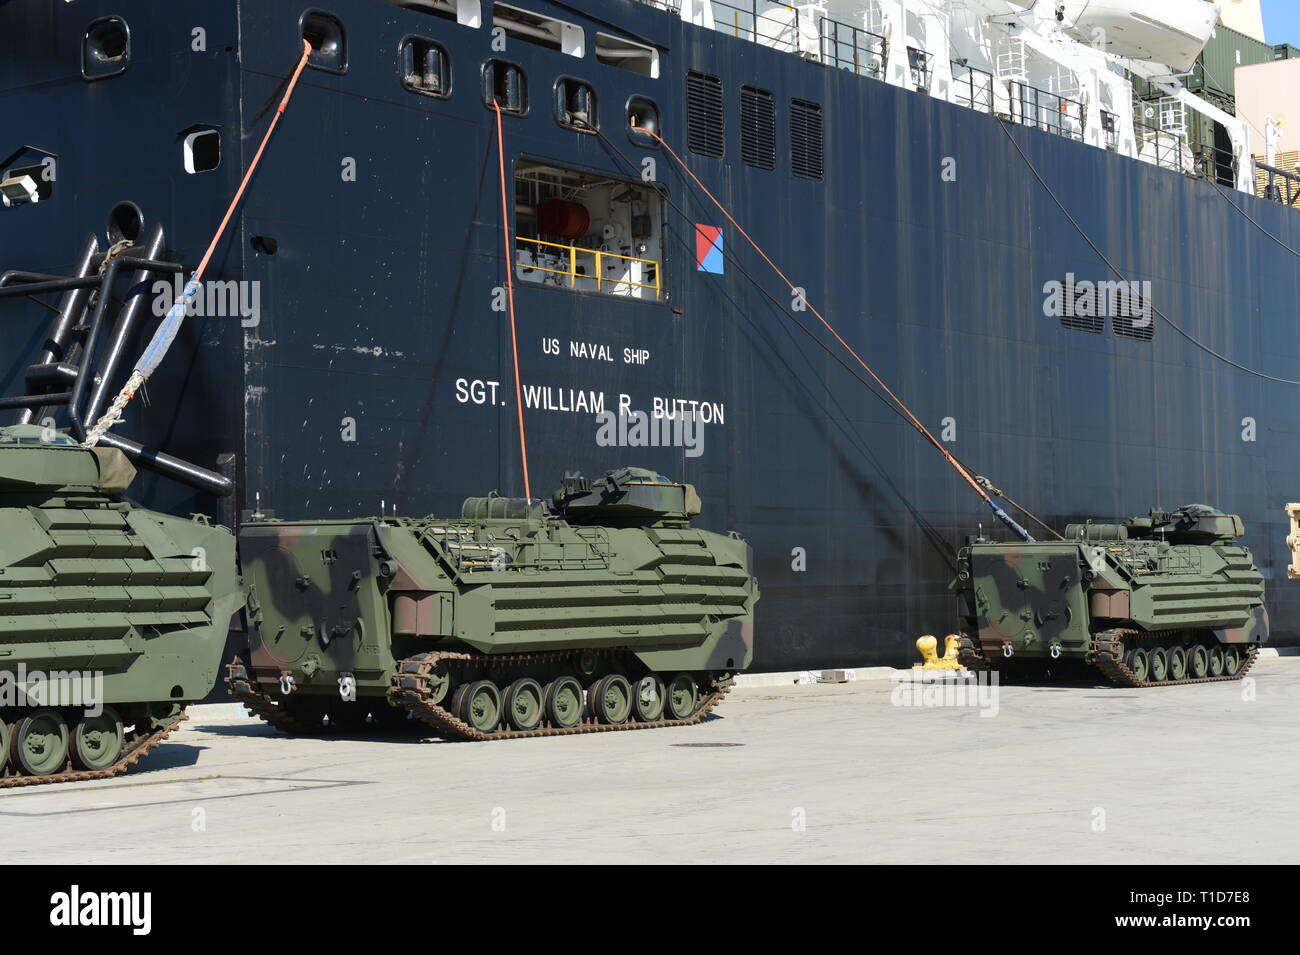 190318-N-MW964-1054 PORT HUENEME, Calif. (Mar. 13, 2019) Three amphibious assault vehicles (AAV-7A1) are offloaded from Military Sealift Command vessel USNS SGT William R. Button (T-AK 3012) in a maritime prepositioning force training evolution in Port Hueneme, California during Exercise Pacific Blitz 2019 (PacBlitz19). The inherently dynamic, scalable, and combined-arms capability of MAGTFs joined with mobility and sustainability provided by amphibious ships gives us an asymmetric advantage over adversaries.  PacBlitz19 increases the ability of all participants to plan, communicate and conduc Stock Photo